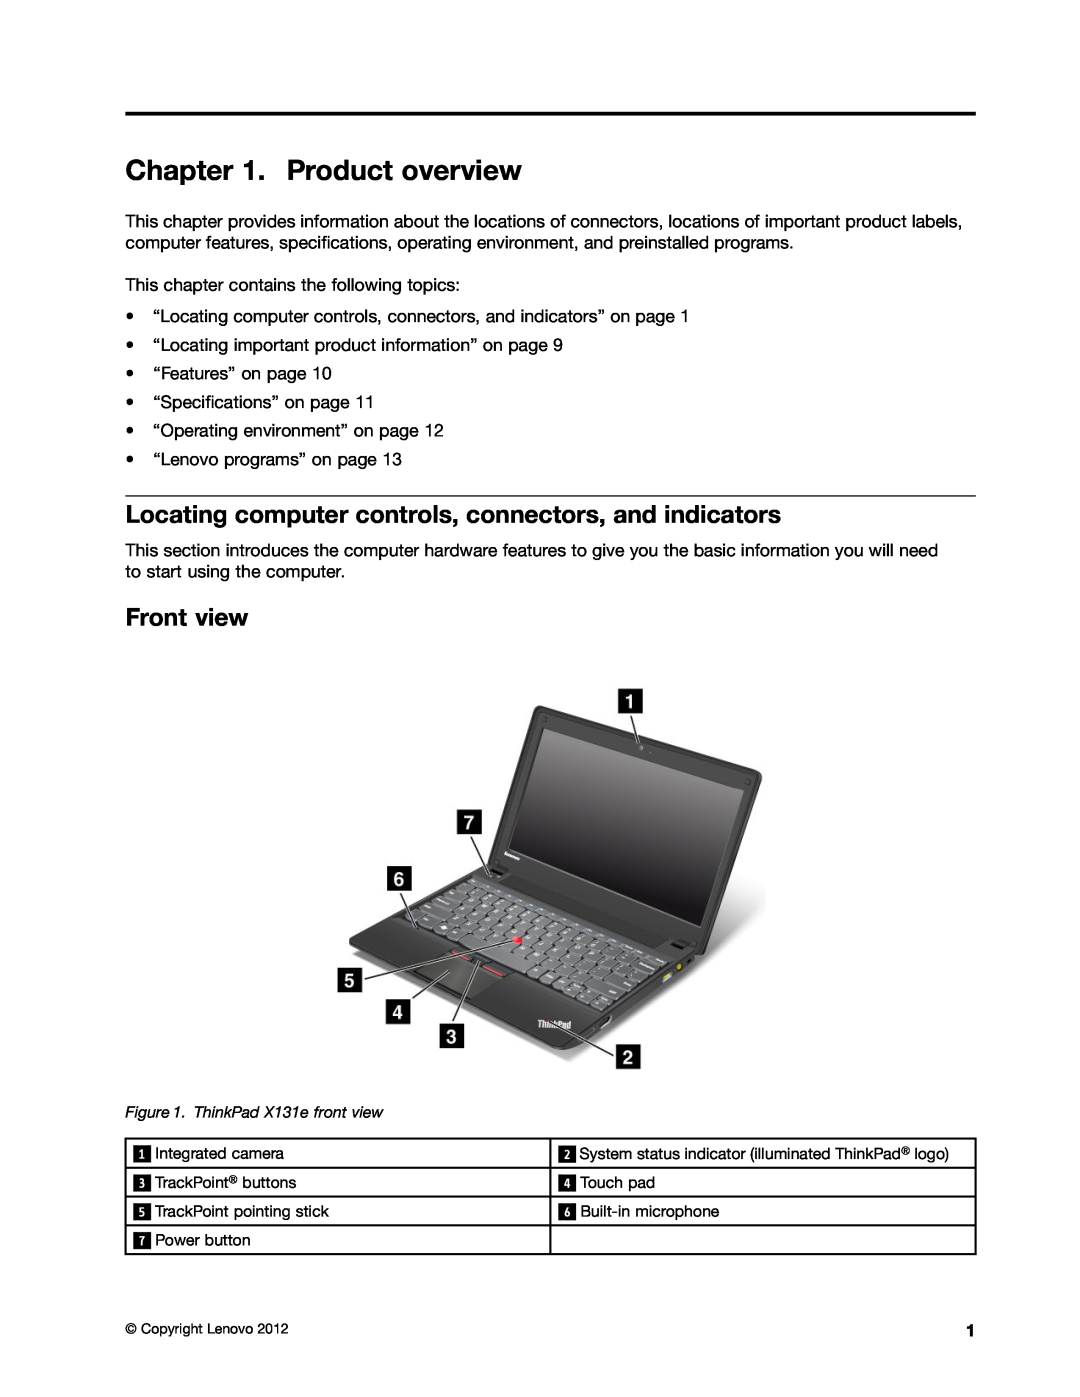 Lenovo X131E manual Product overview, Locating computer controls, connectors, and indicators, Front view 